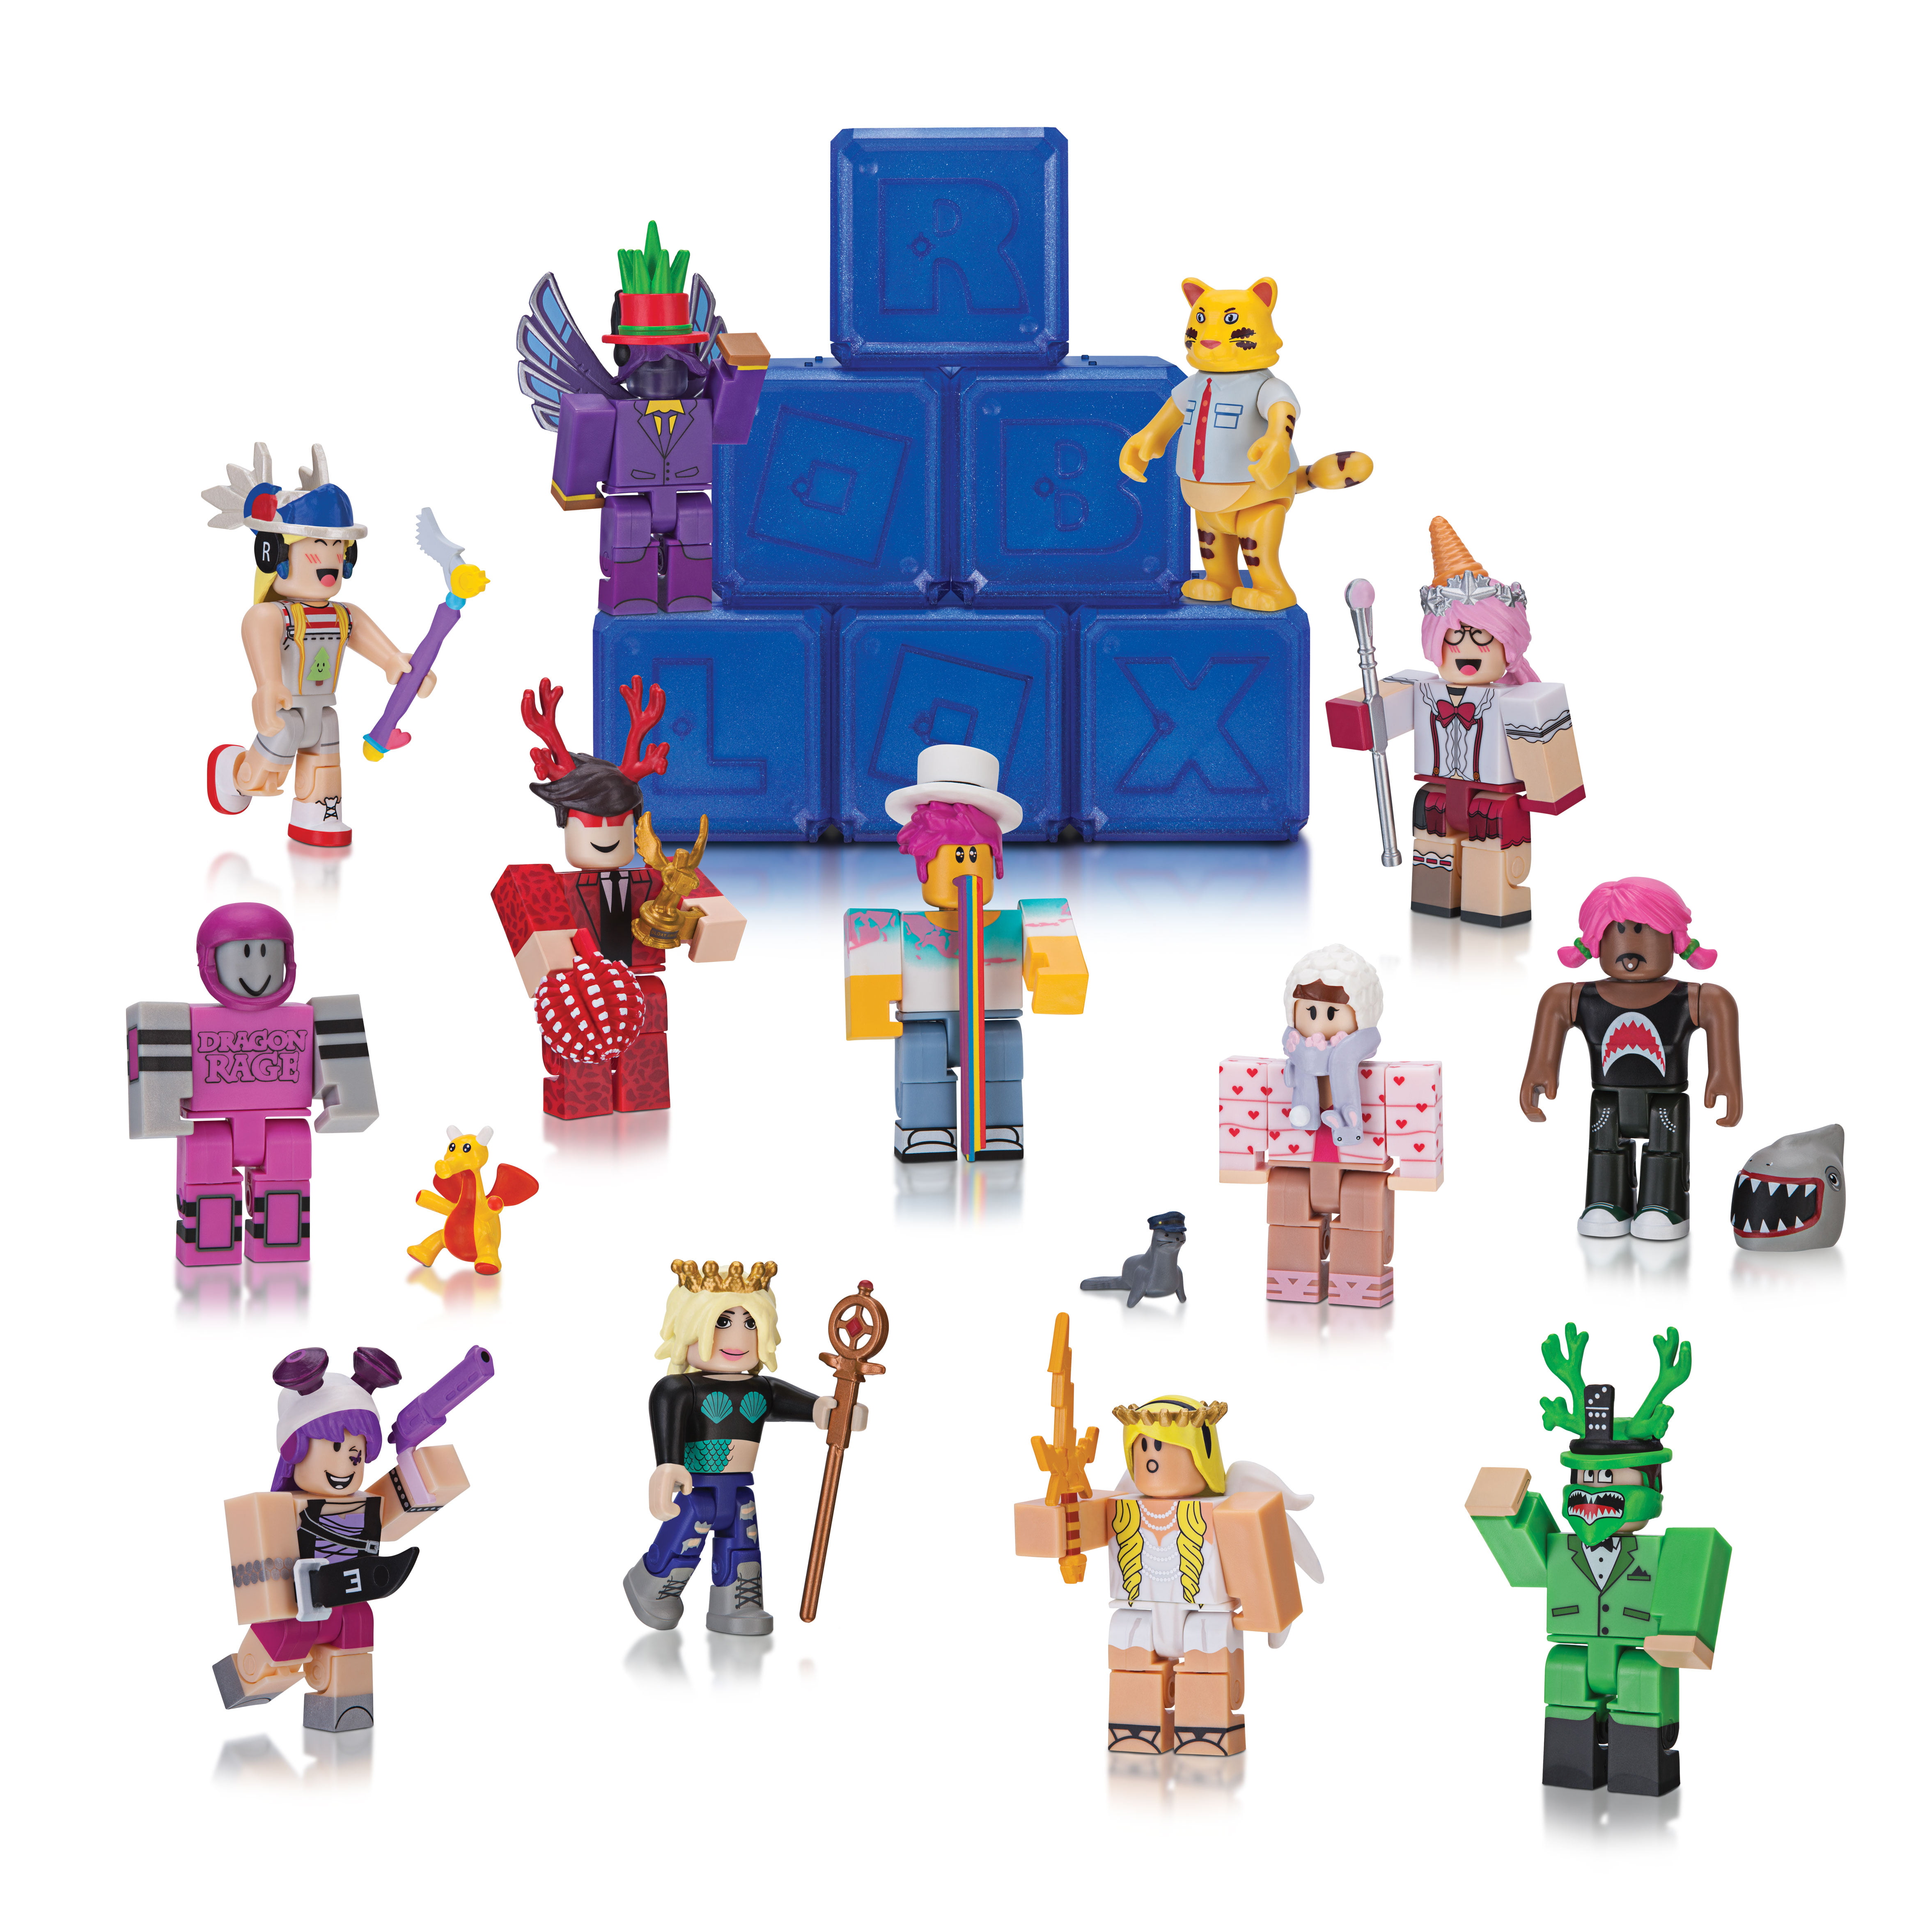 Roblox Celebrity Collection Series 2 Mystery Figure Includes 1 Figure Exclusive Virtual Item Walmart Com Walmart Com - roblox celebrity mystery figure series 2 walmart com walmart com